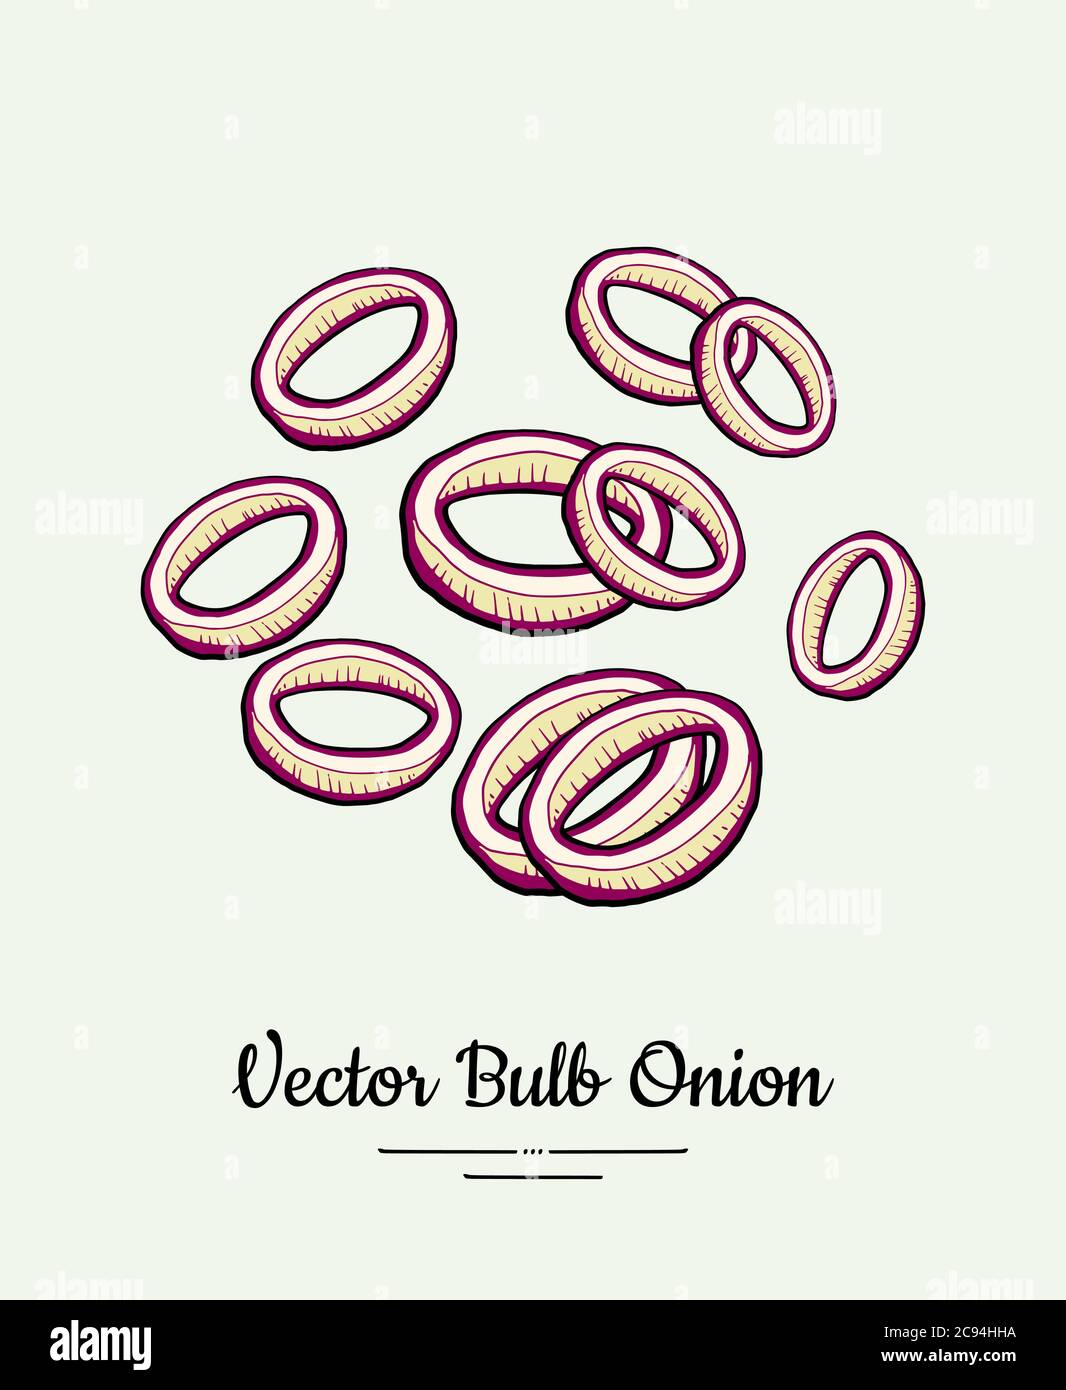 918 Onion Rings Doodle Images, Stock Photos, 3D objects, & Vectors |  Shutterstock